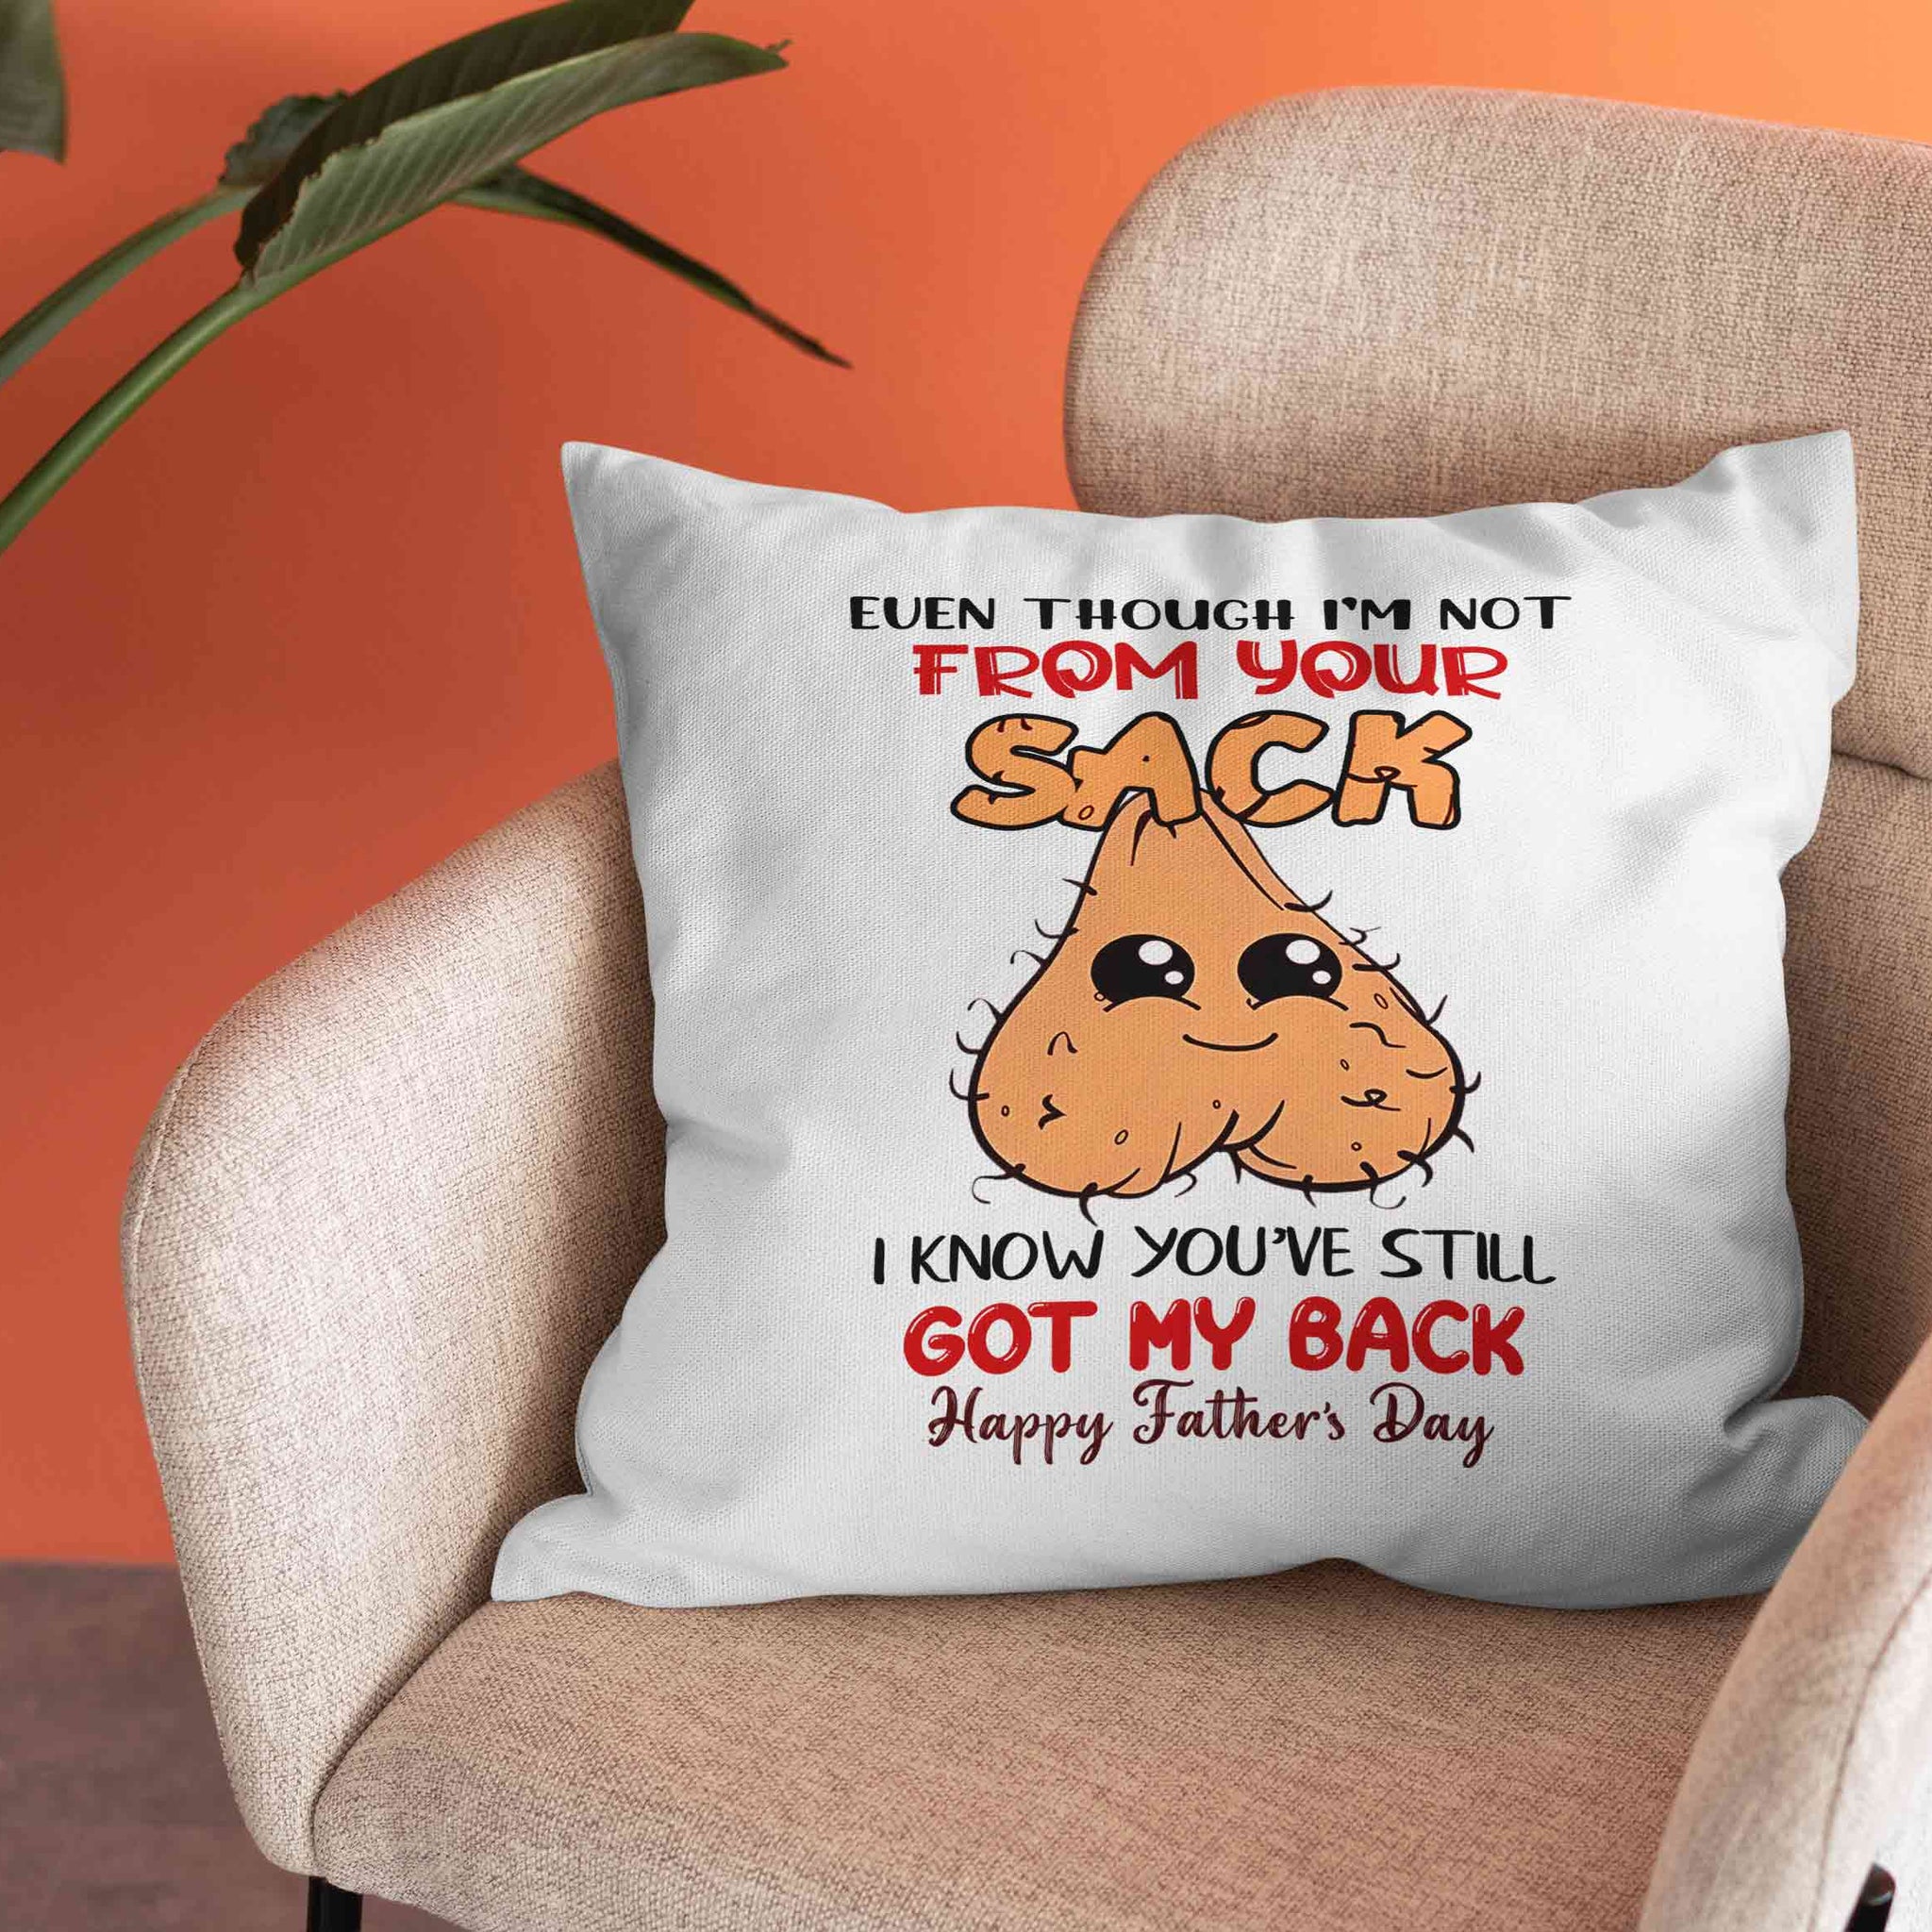 Happy Father's Day Pillow, Funny Dad Pillow, Father Pillow, Father Gift Pillow, Family Pillow, Gift Pillow For Father